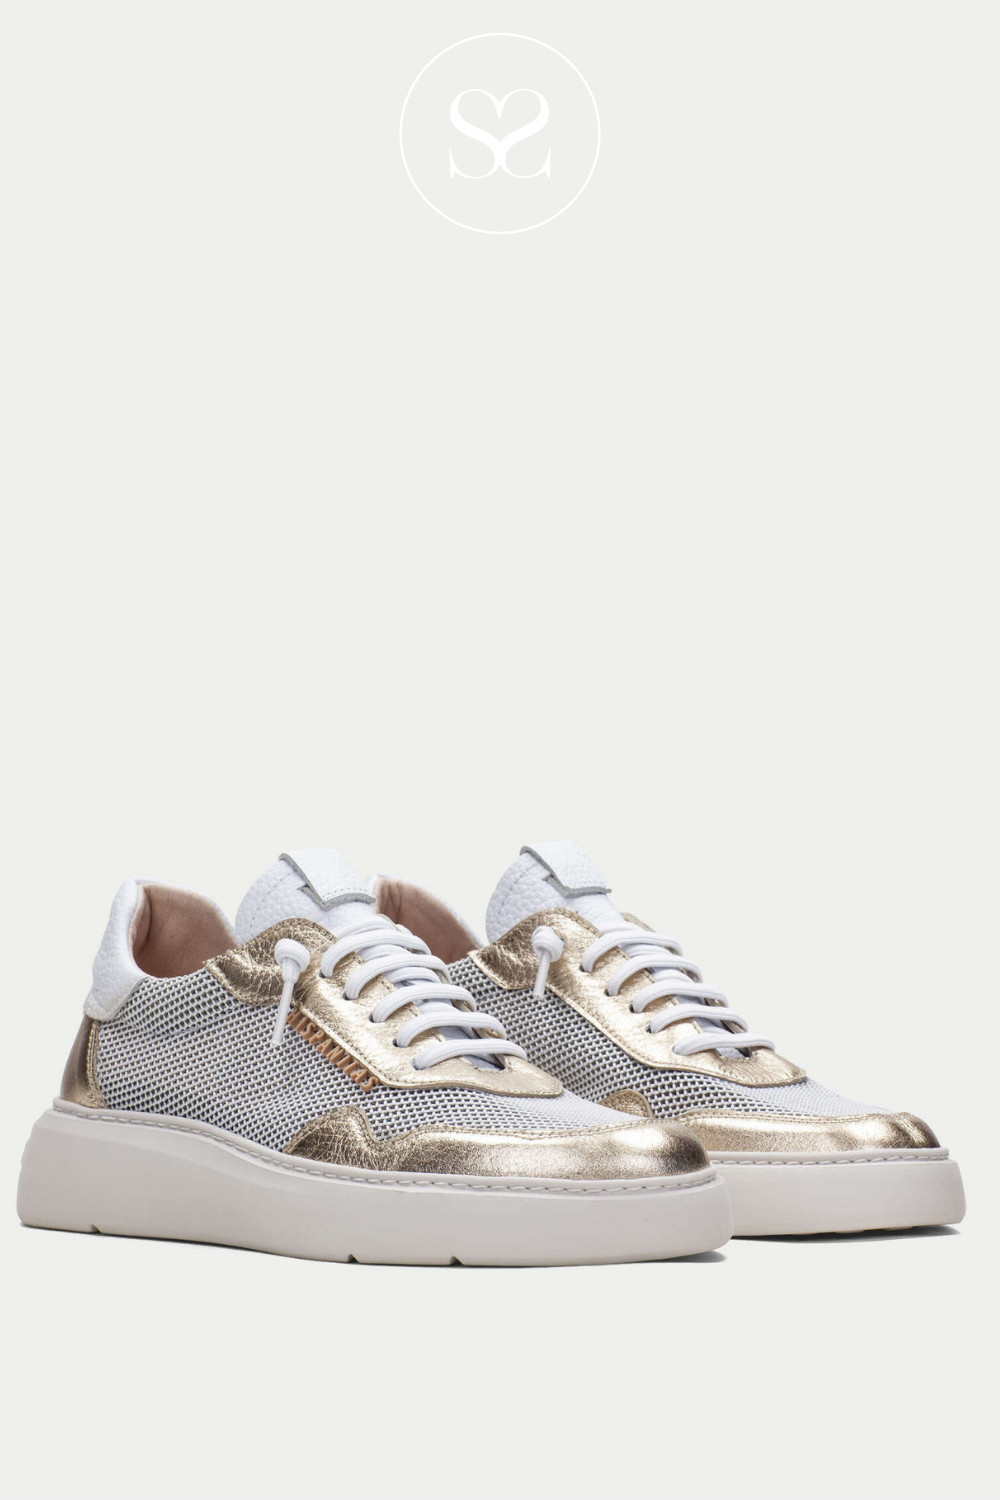 HISPANITAS HV242412 SILVER GOLD ELASTICATED LACE TRAINERS